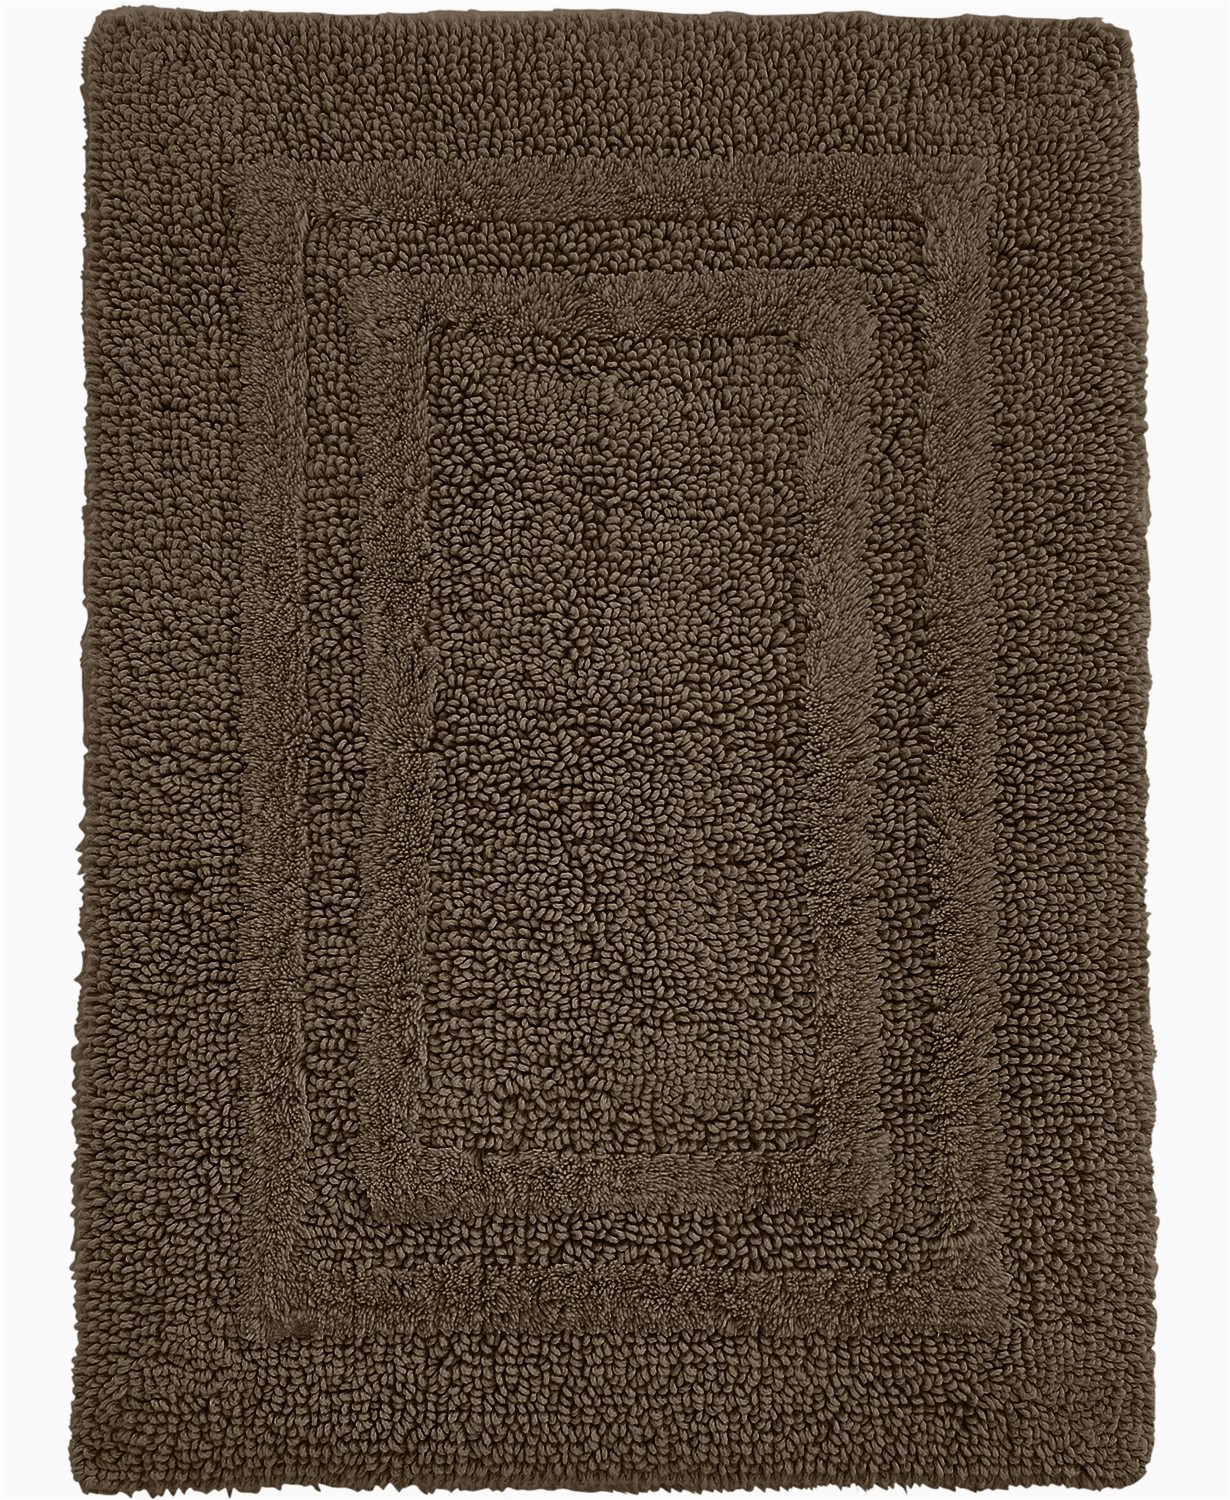 Reversible Bath Rugs Sale Hotel Collection Cotton Reversible 18 Inches X 25 Inches Bath Rug Pamper Your Feet with This Super soft Reversible Bath Rug Chocolate